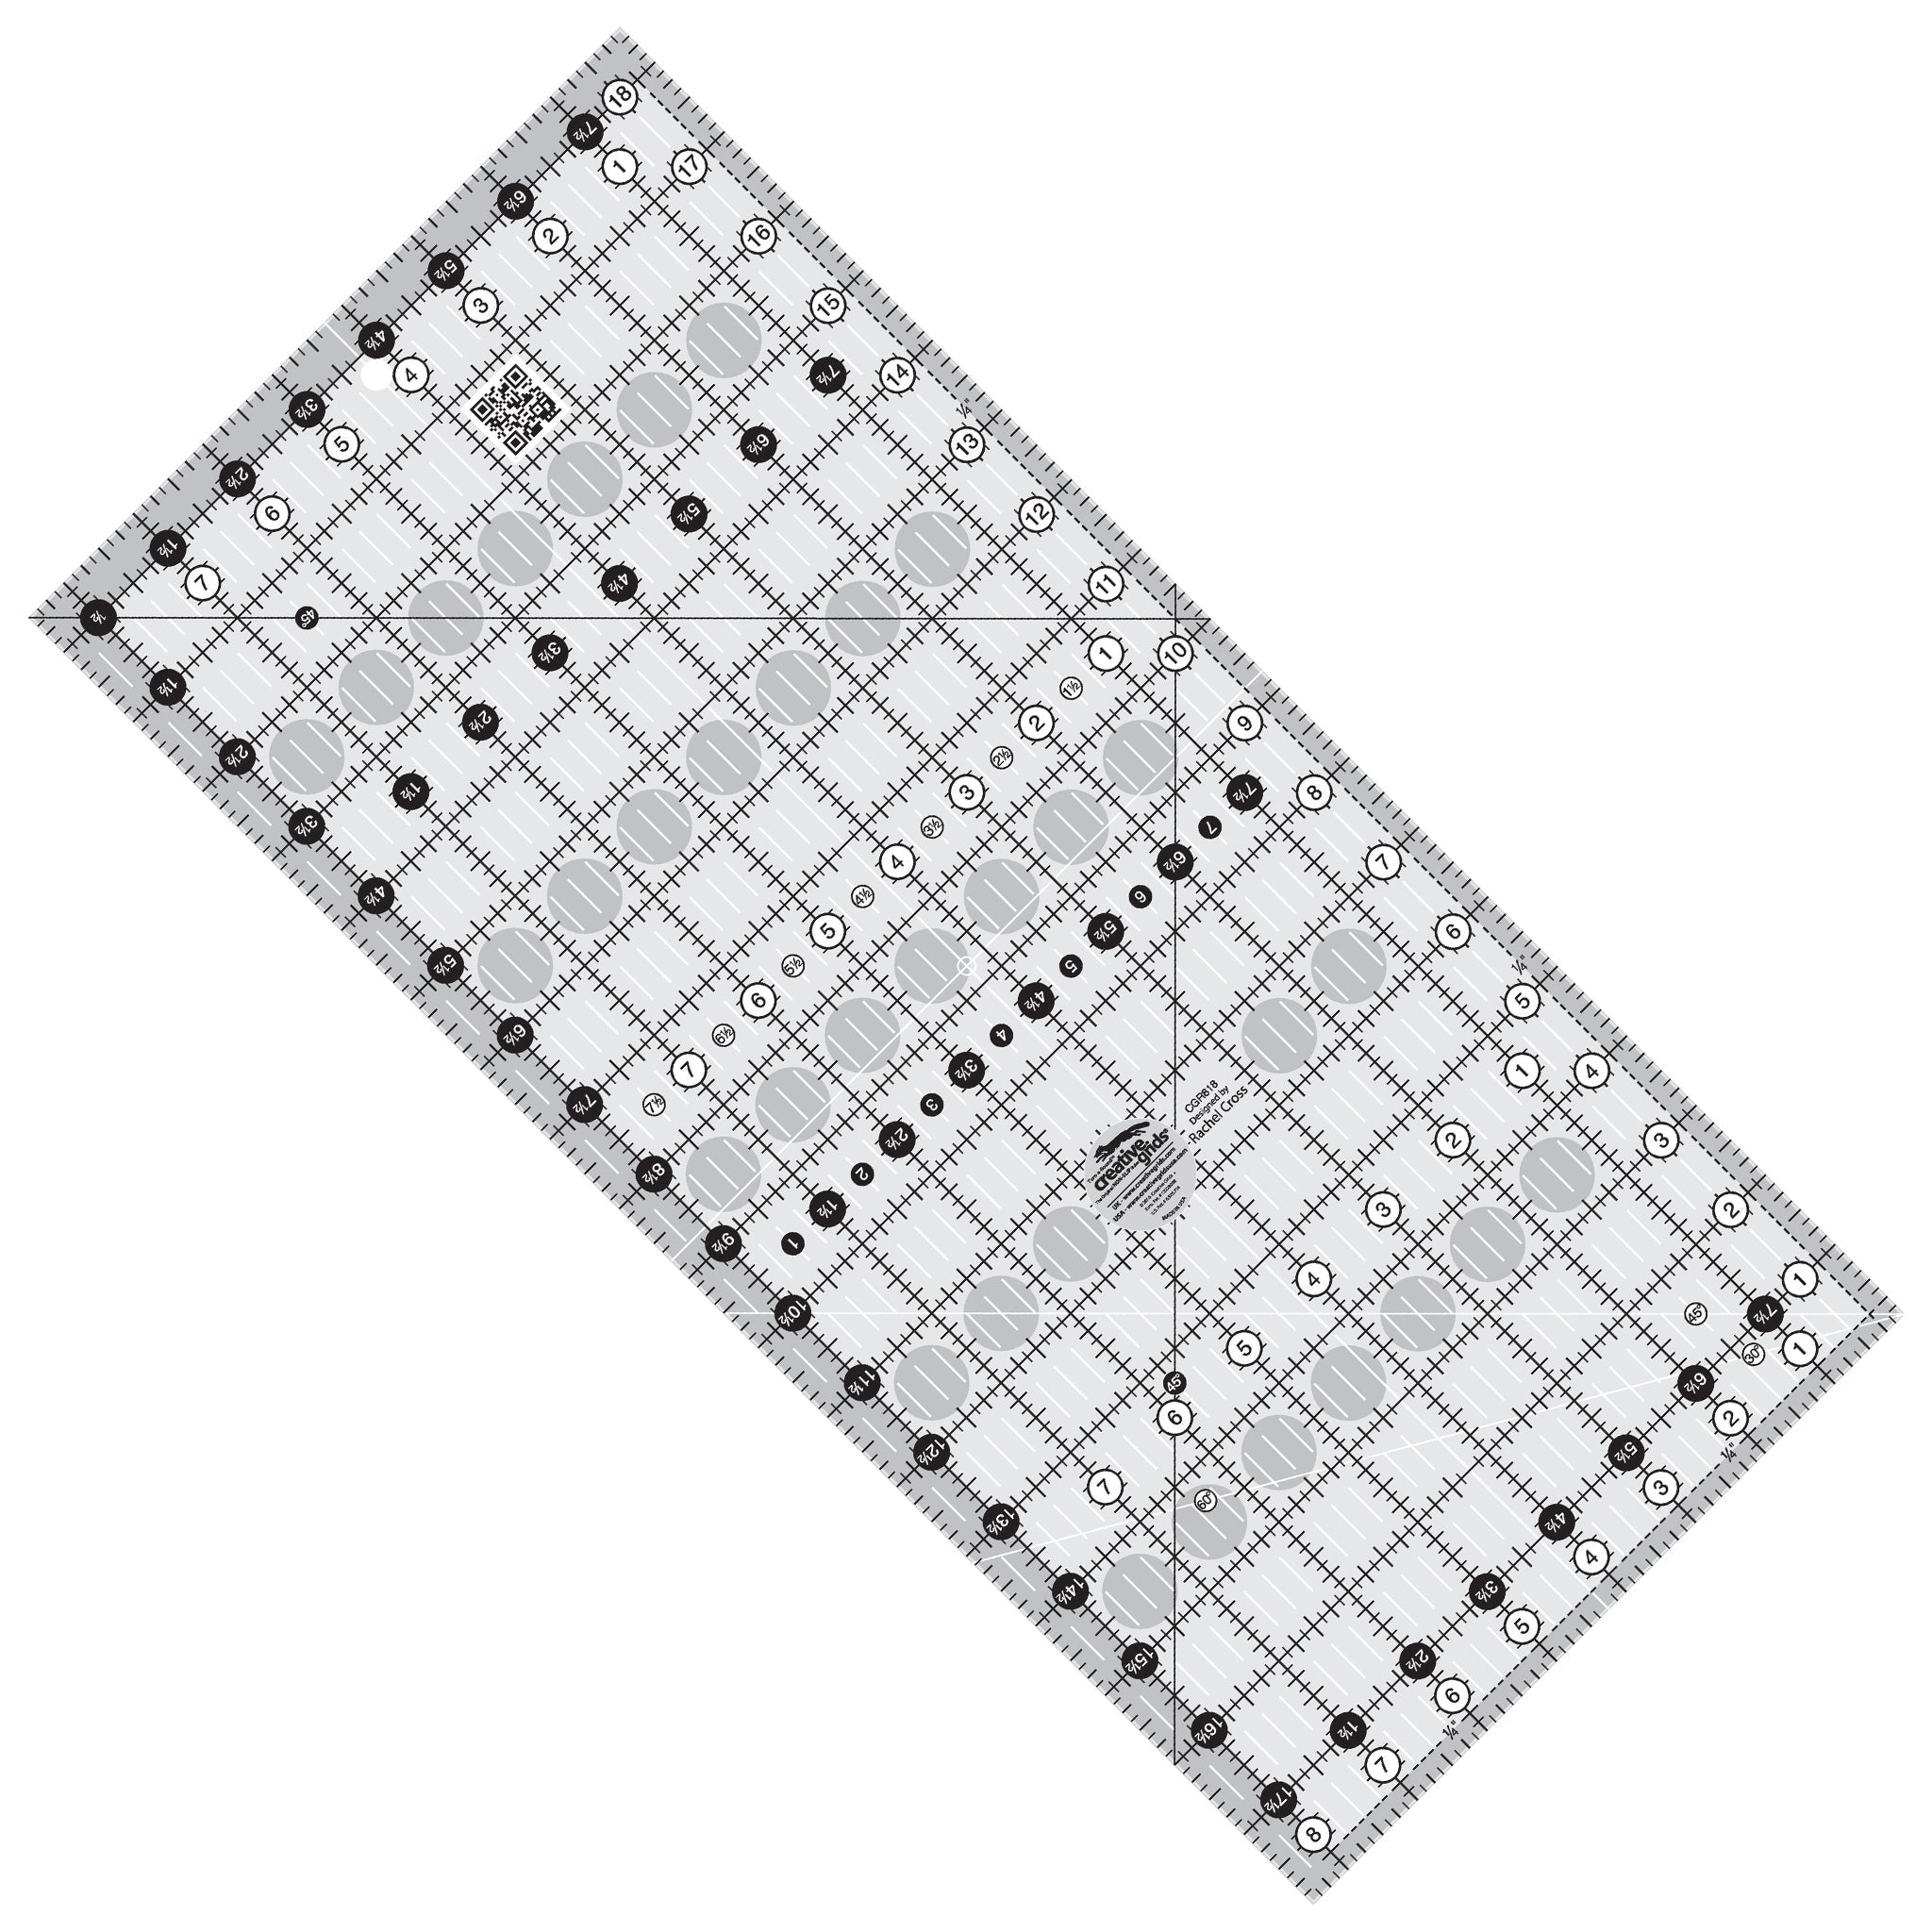 Creative Grids 8-1/2-Inch x 18-1/2-Inch Quilt Ruler (CGR818)